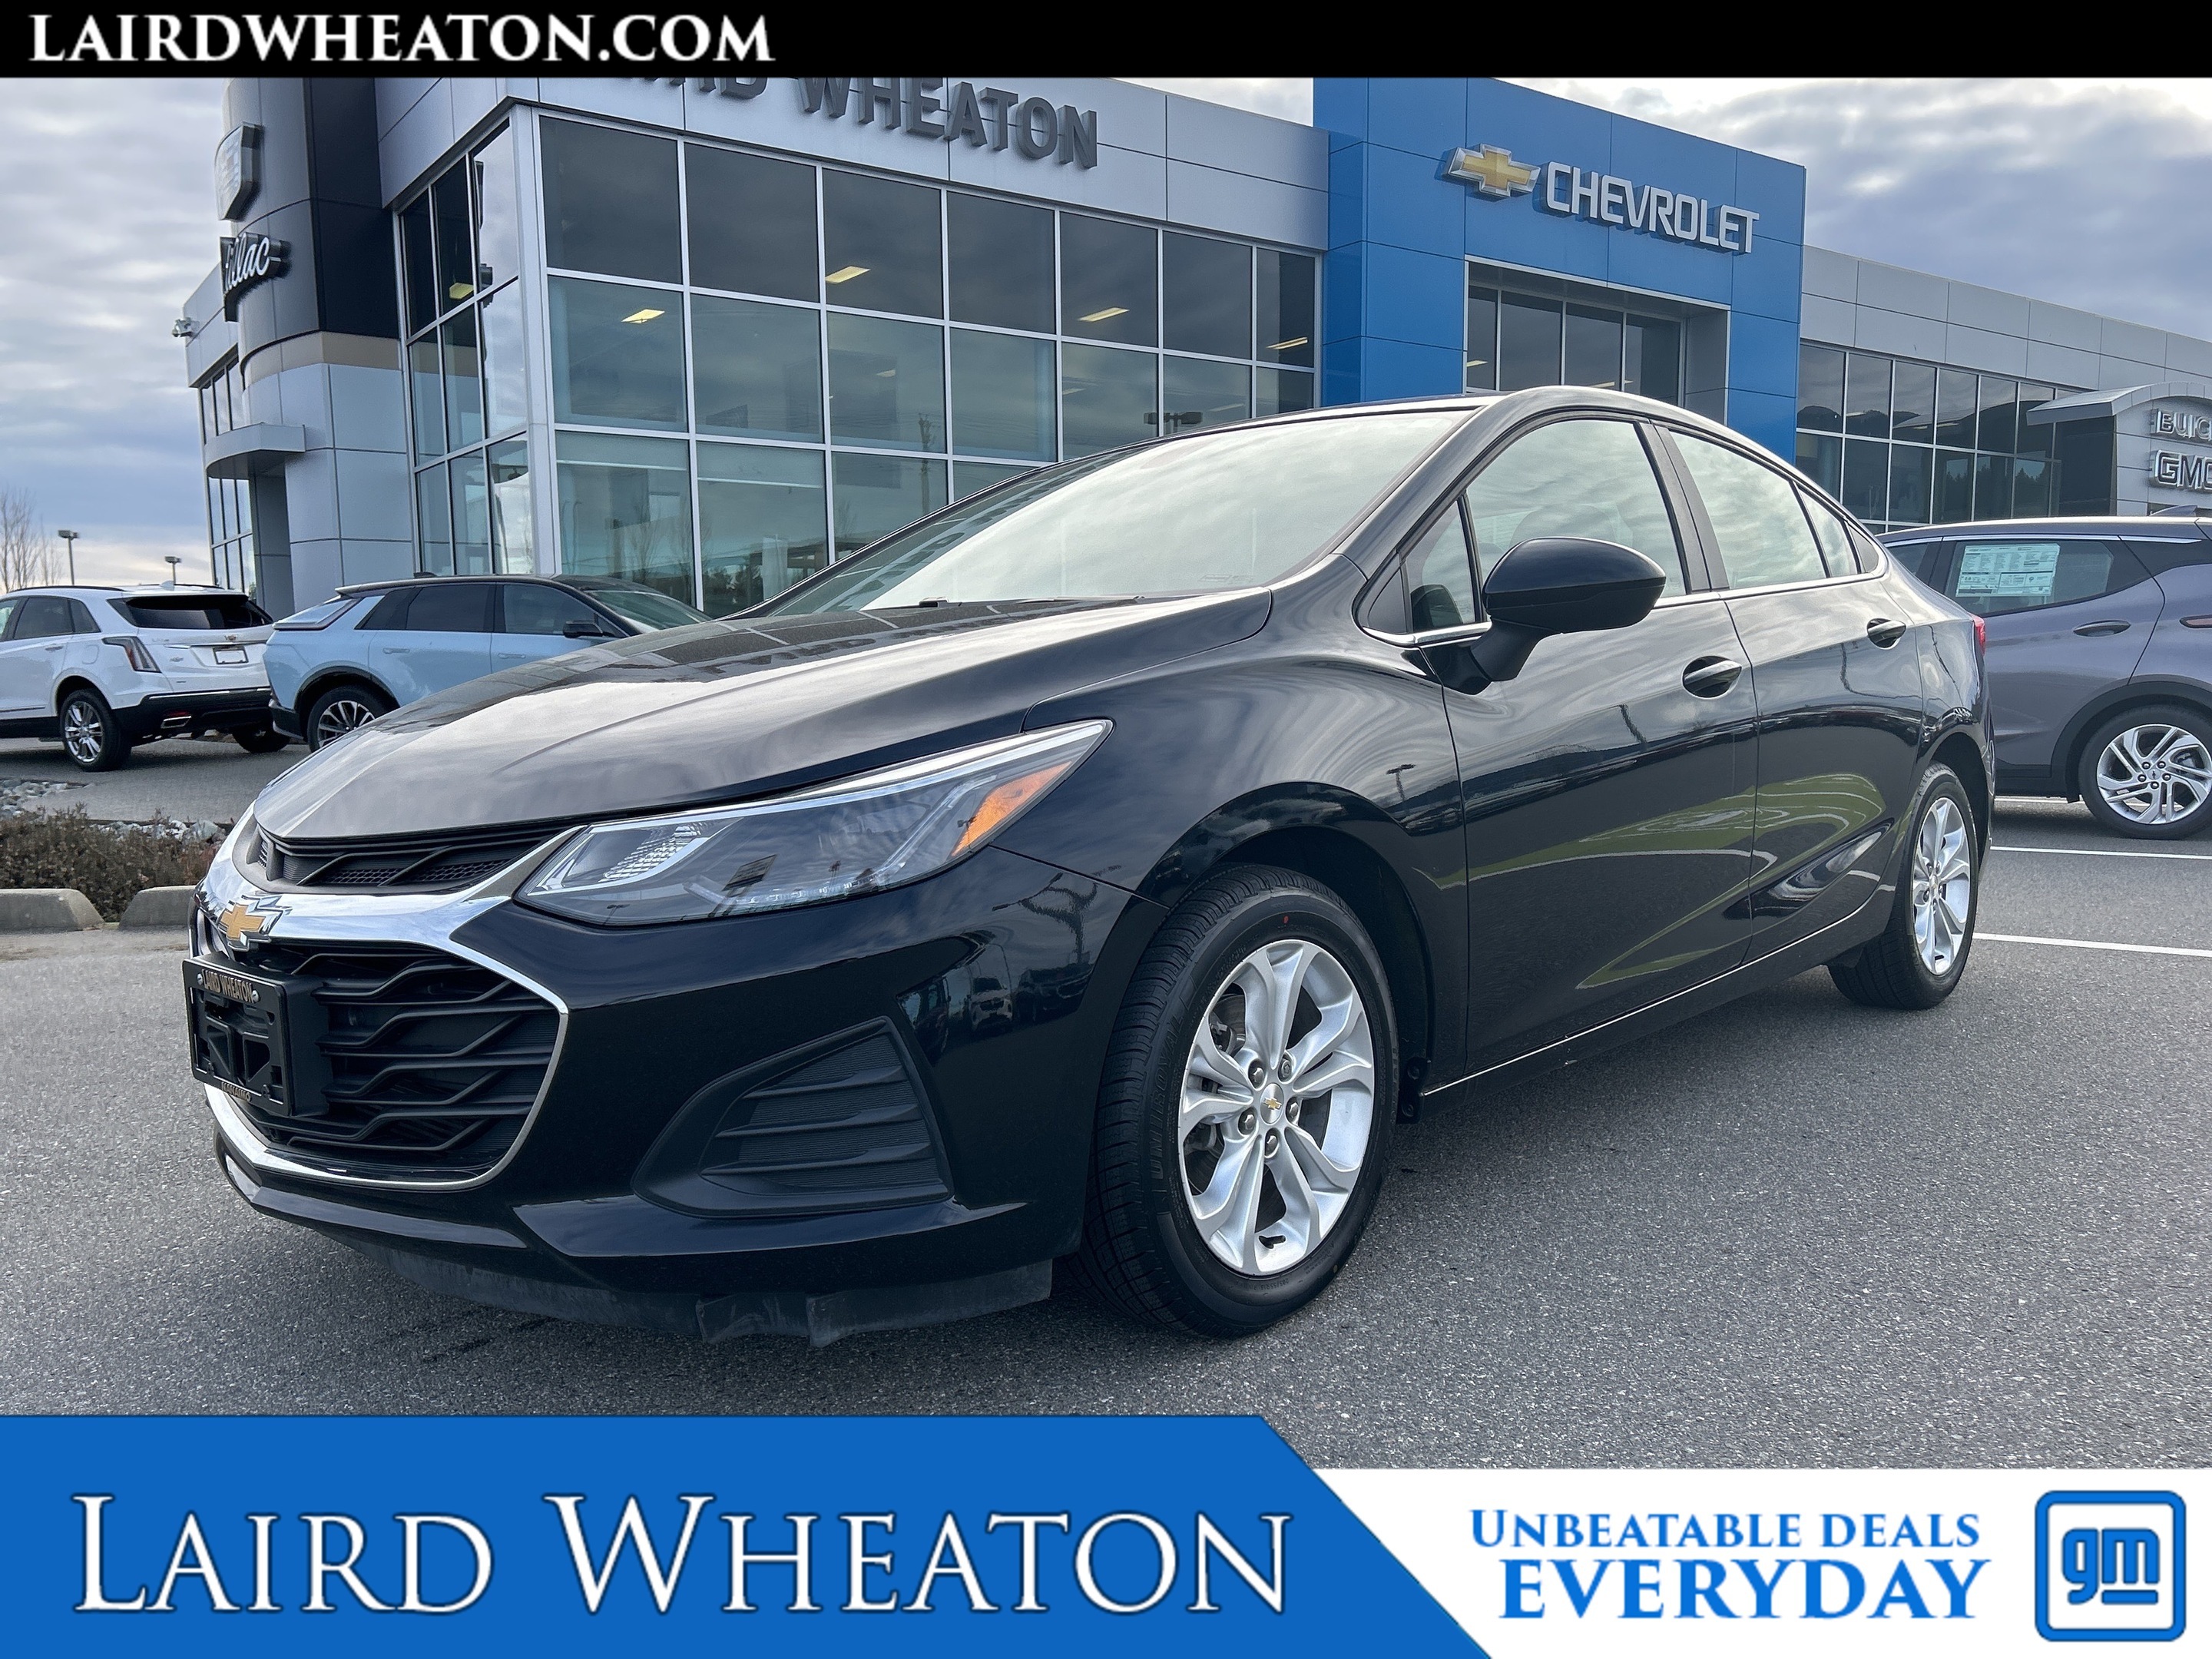 2019 Chevrolet Cruze LT, 4-Cylinder, Power Group, Heated Seats